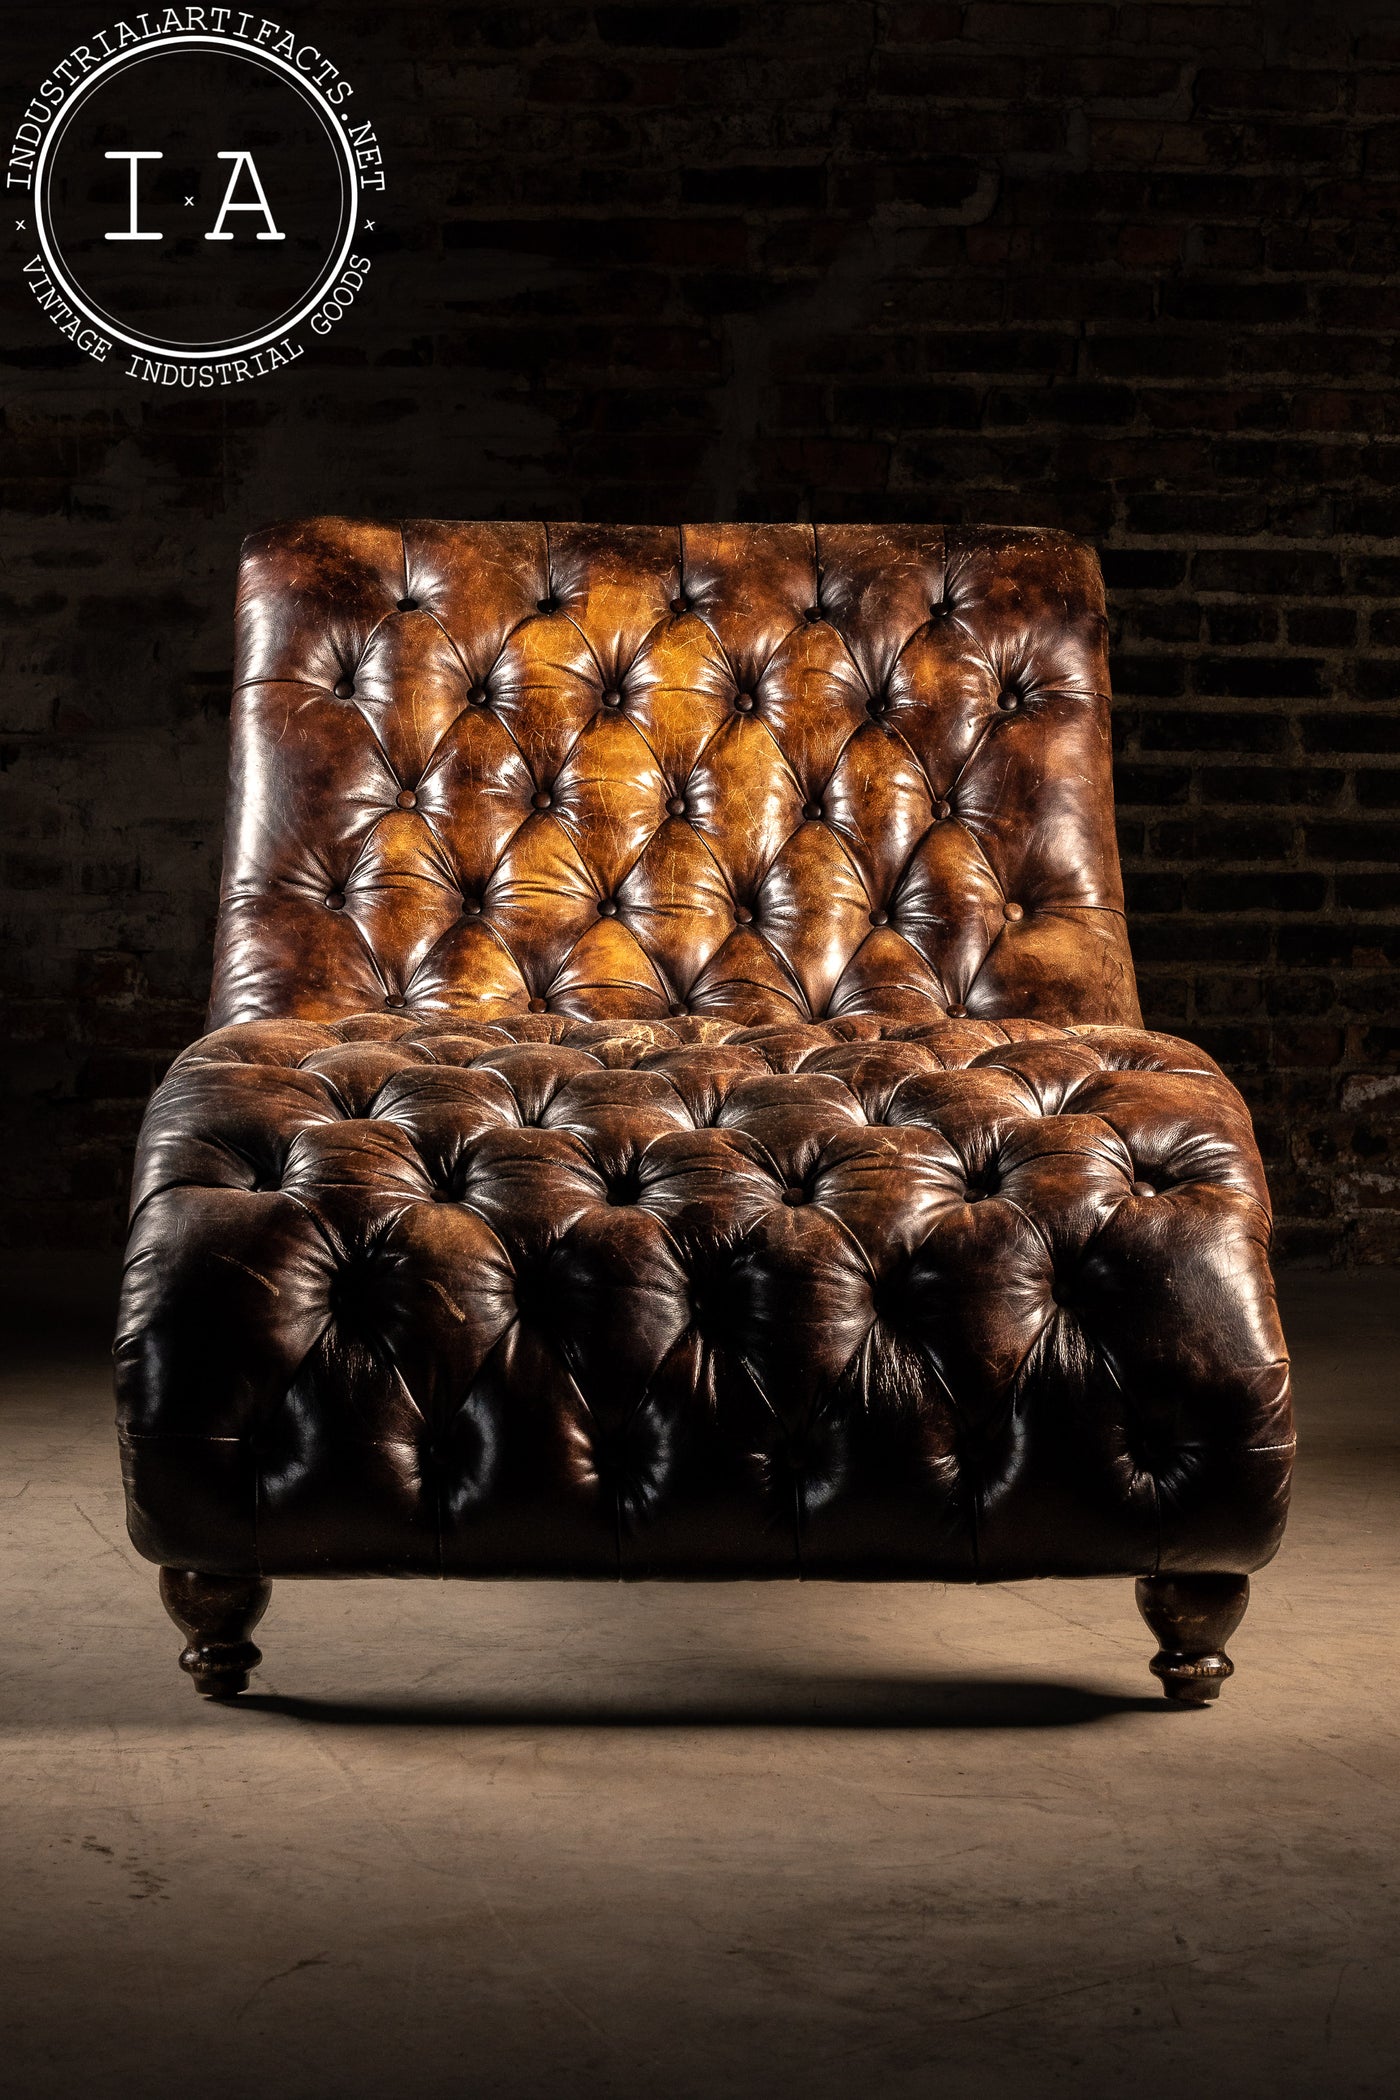 Vintage Chocolate Tufted Chaise